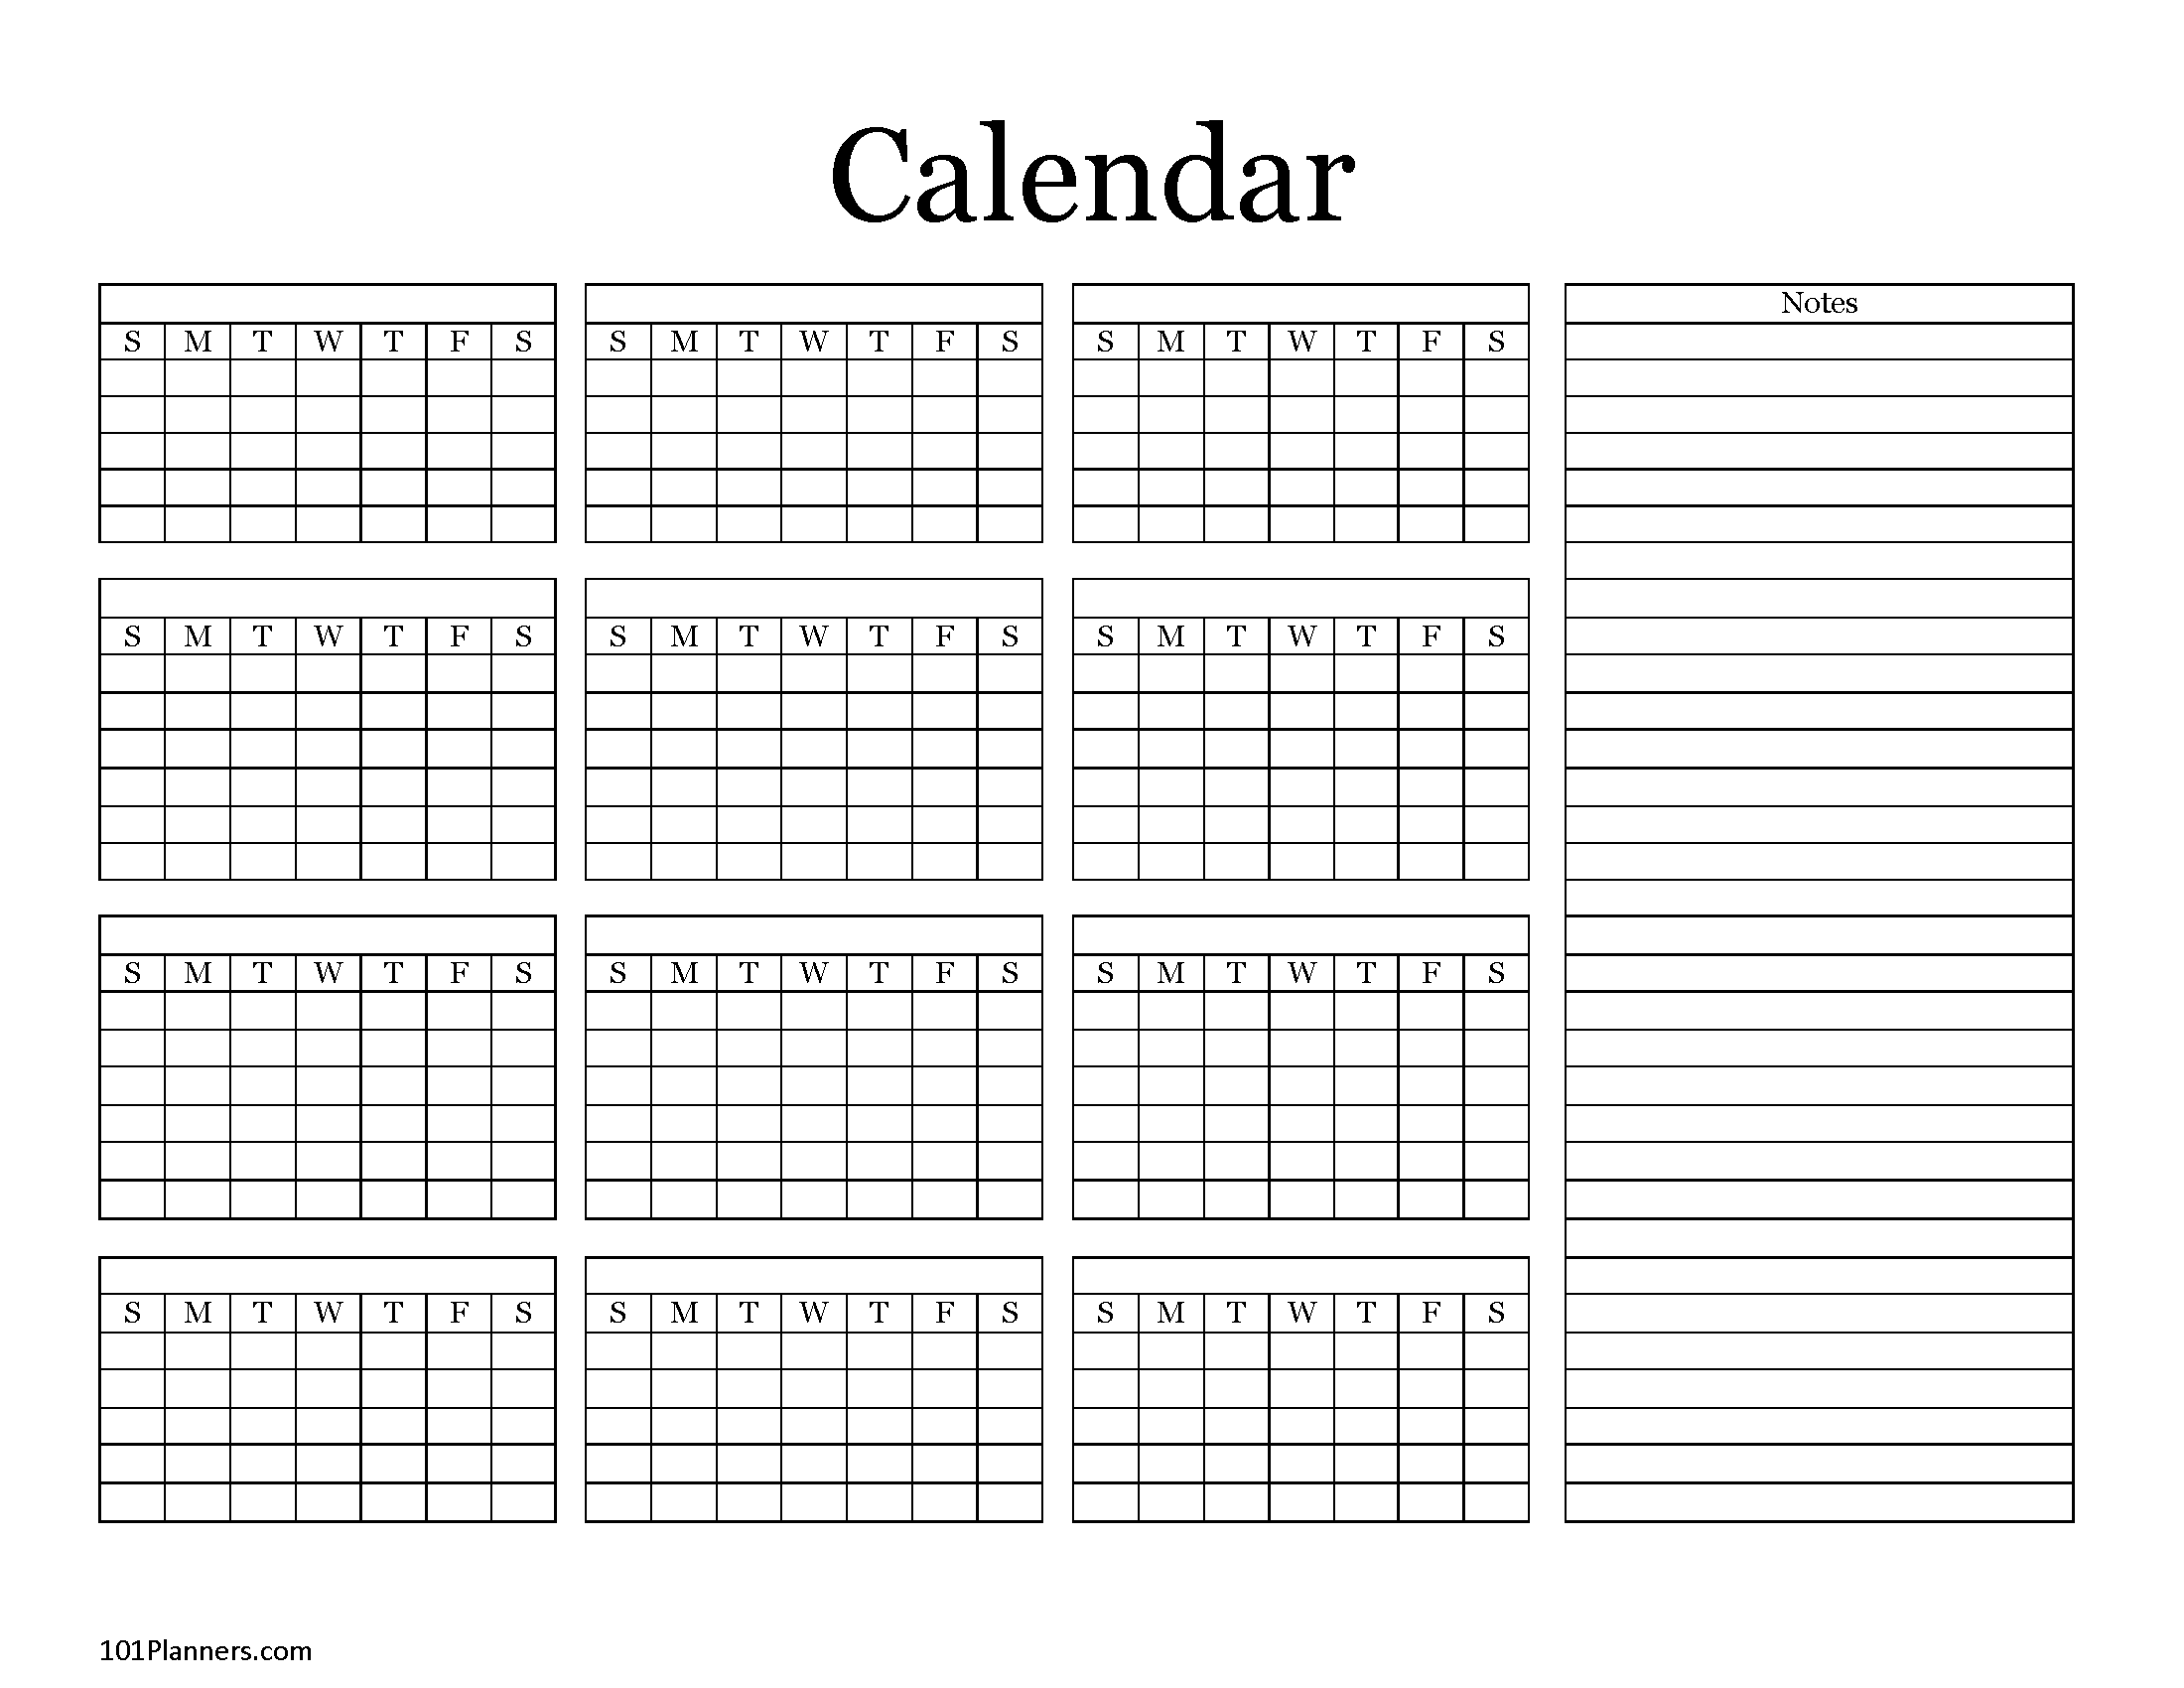 Printable Calendar No Dates Free Yearly Blank Calendar Template Images